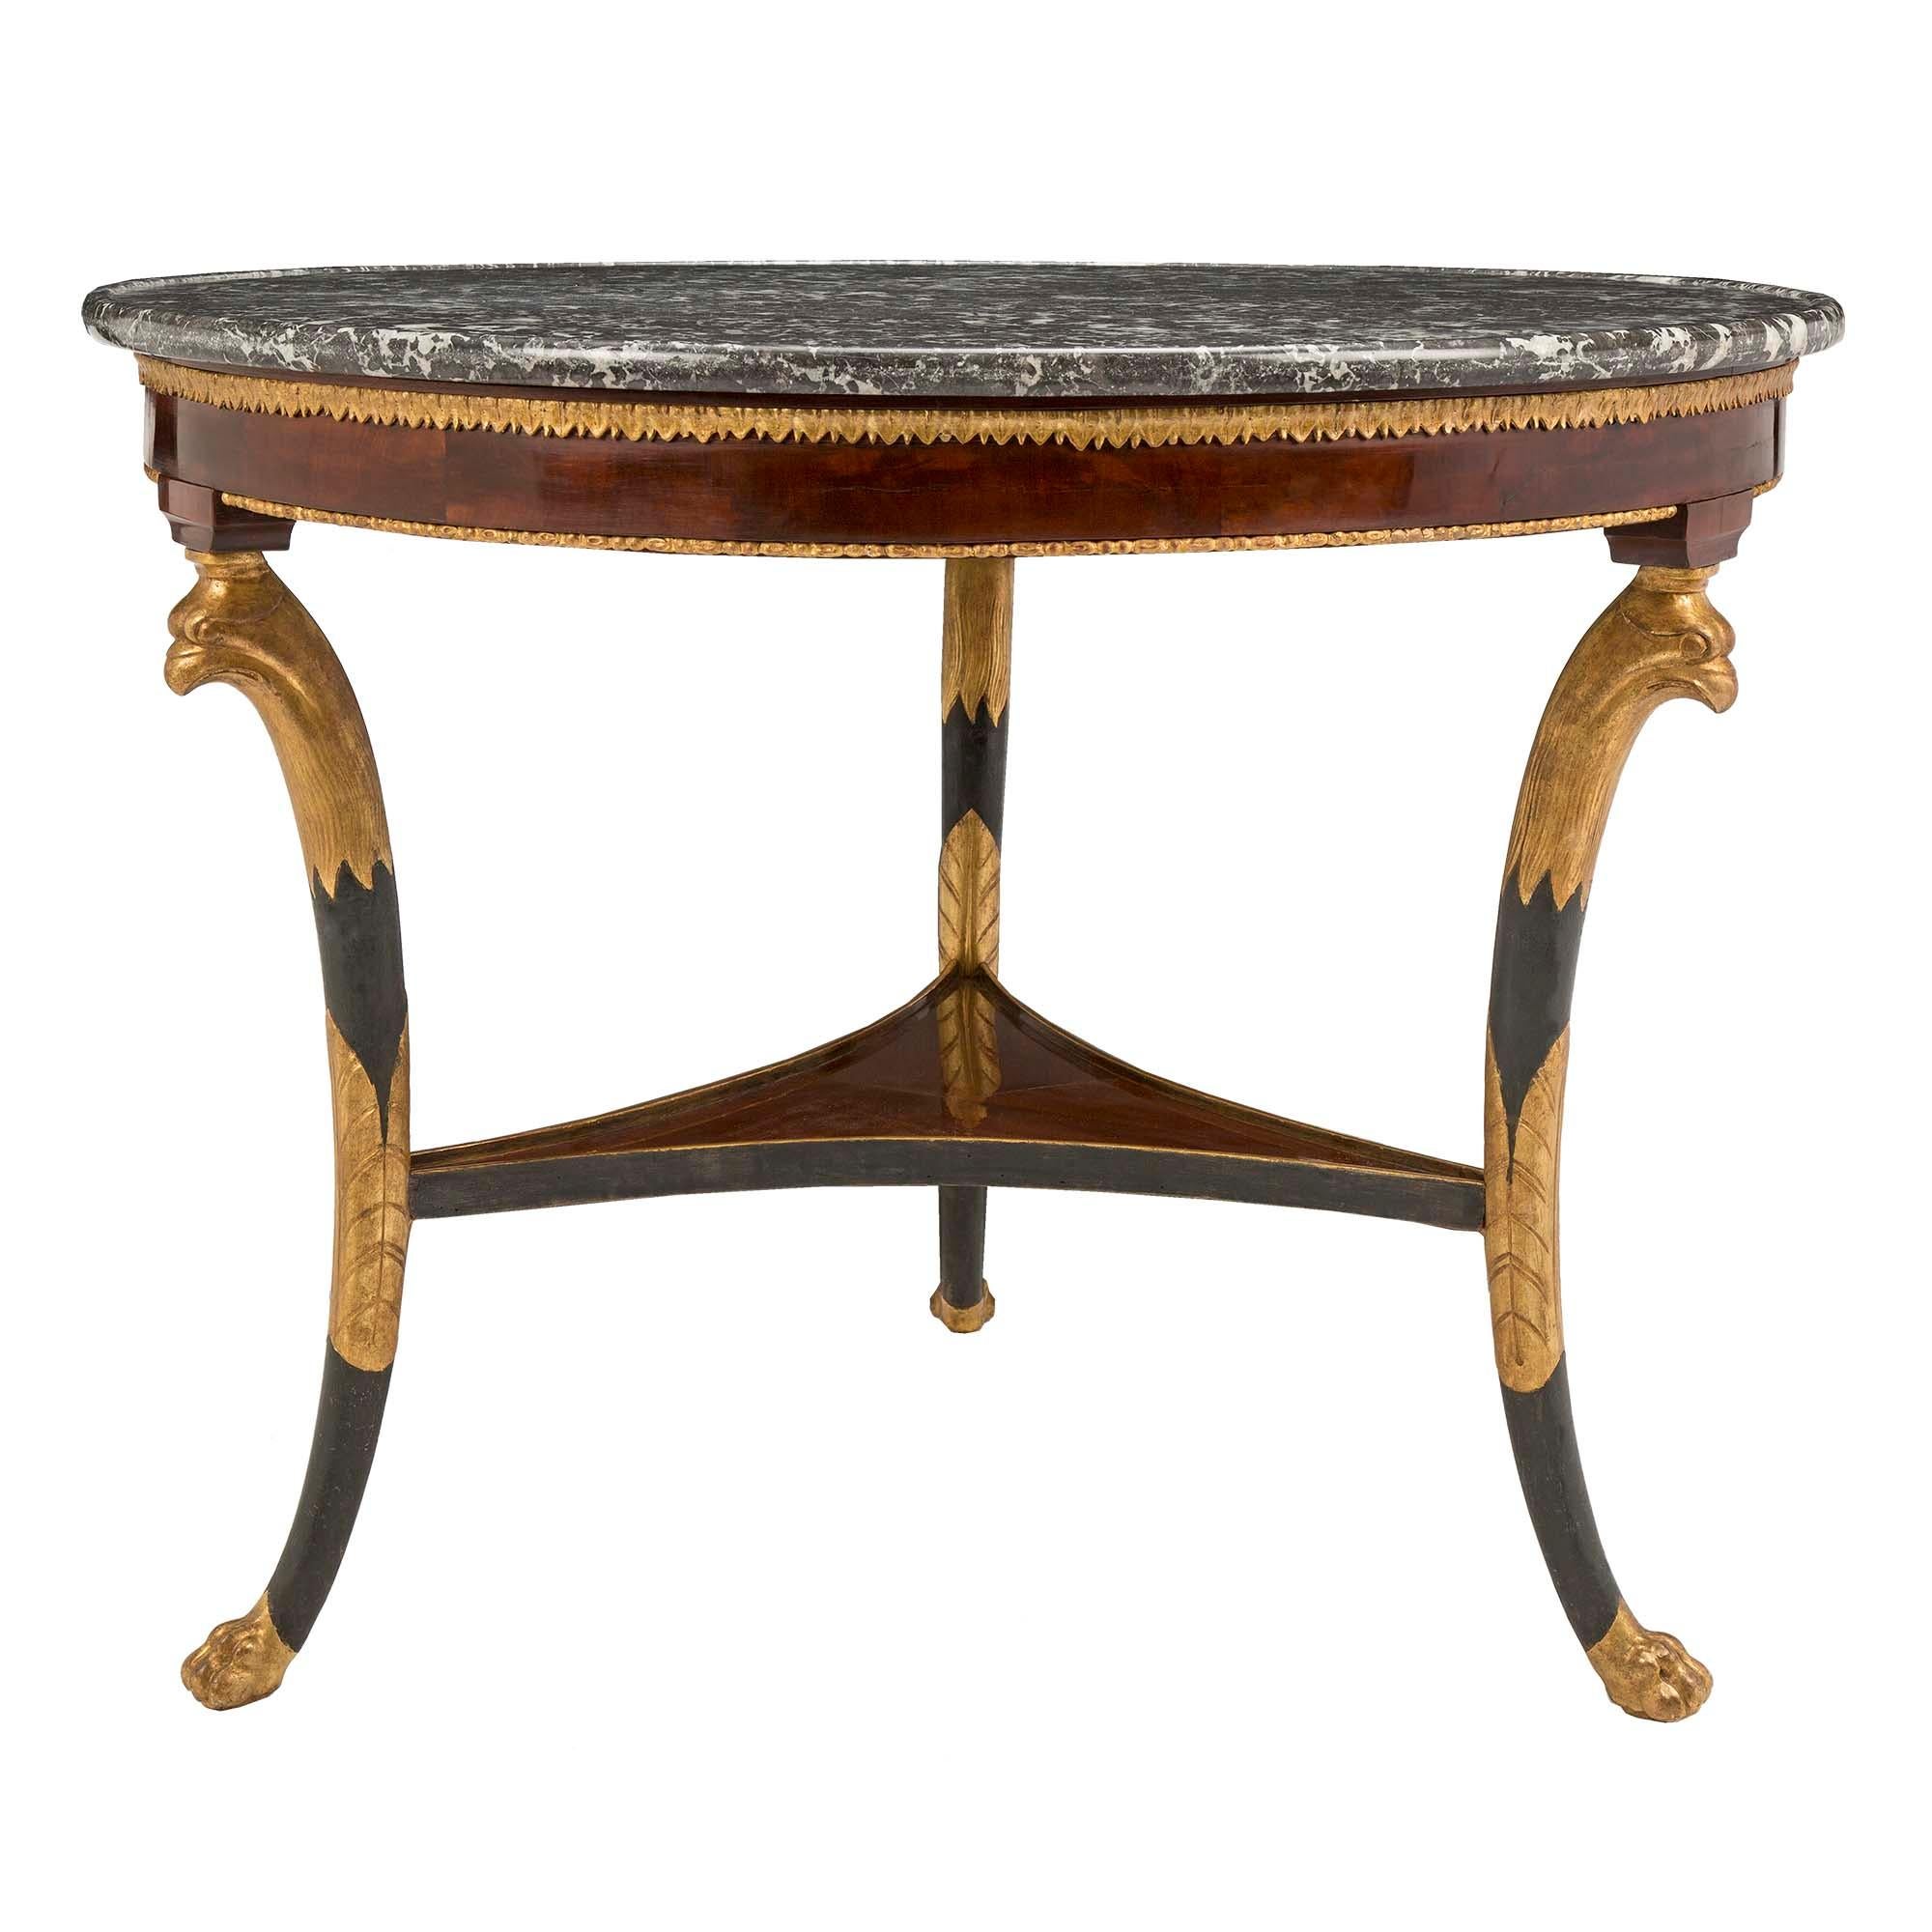 19th Century Continental Directoire Style Flamed Mahogany and Marble Center Table For Sale